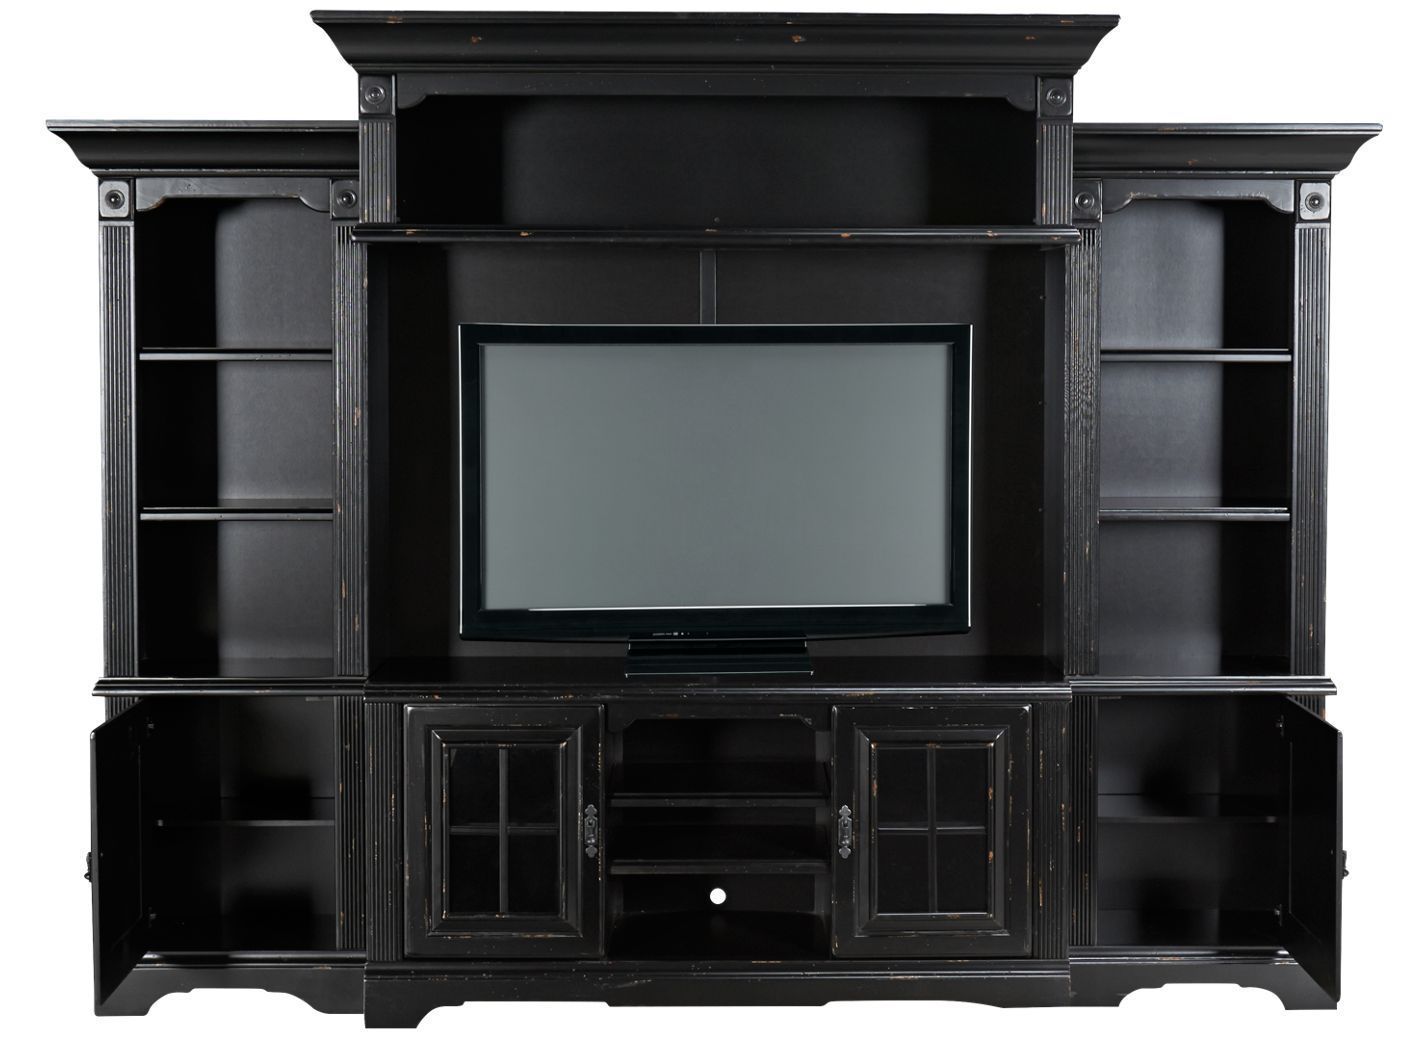 Productimage | Black Entertainment Centers, Black Entertainment Intended For Black Rgb Entertainment Centers (Gallery 12 of 20)